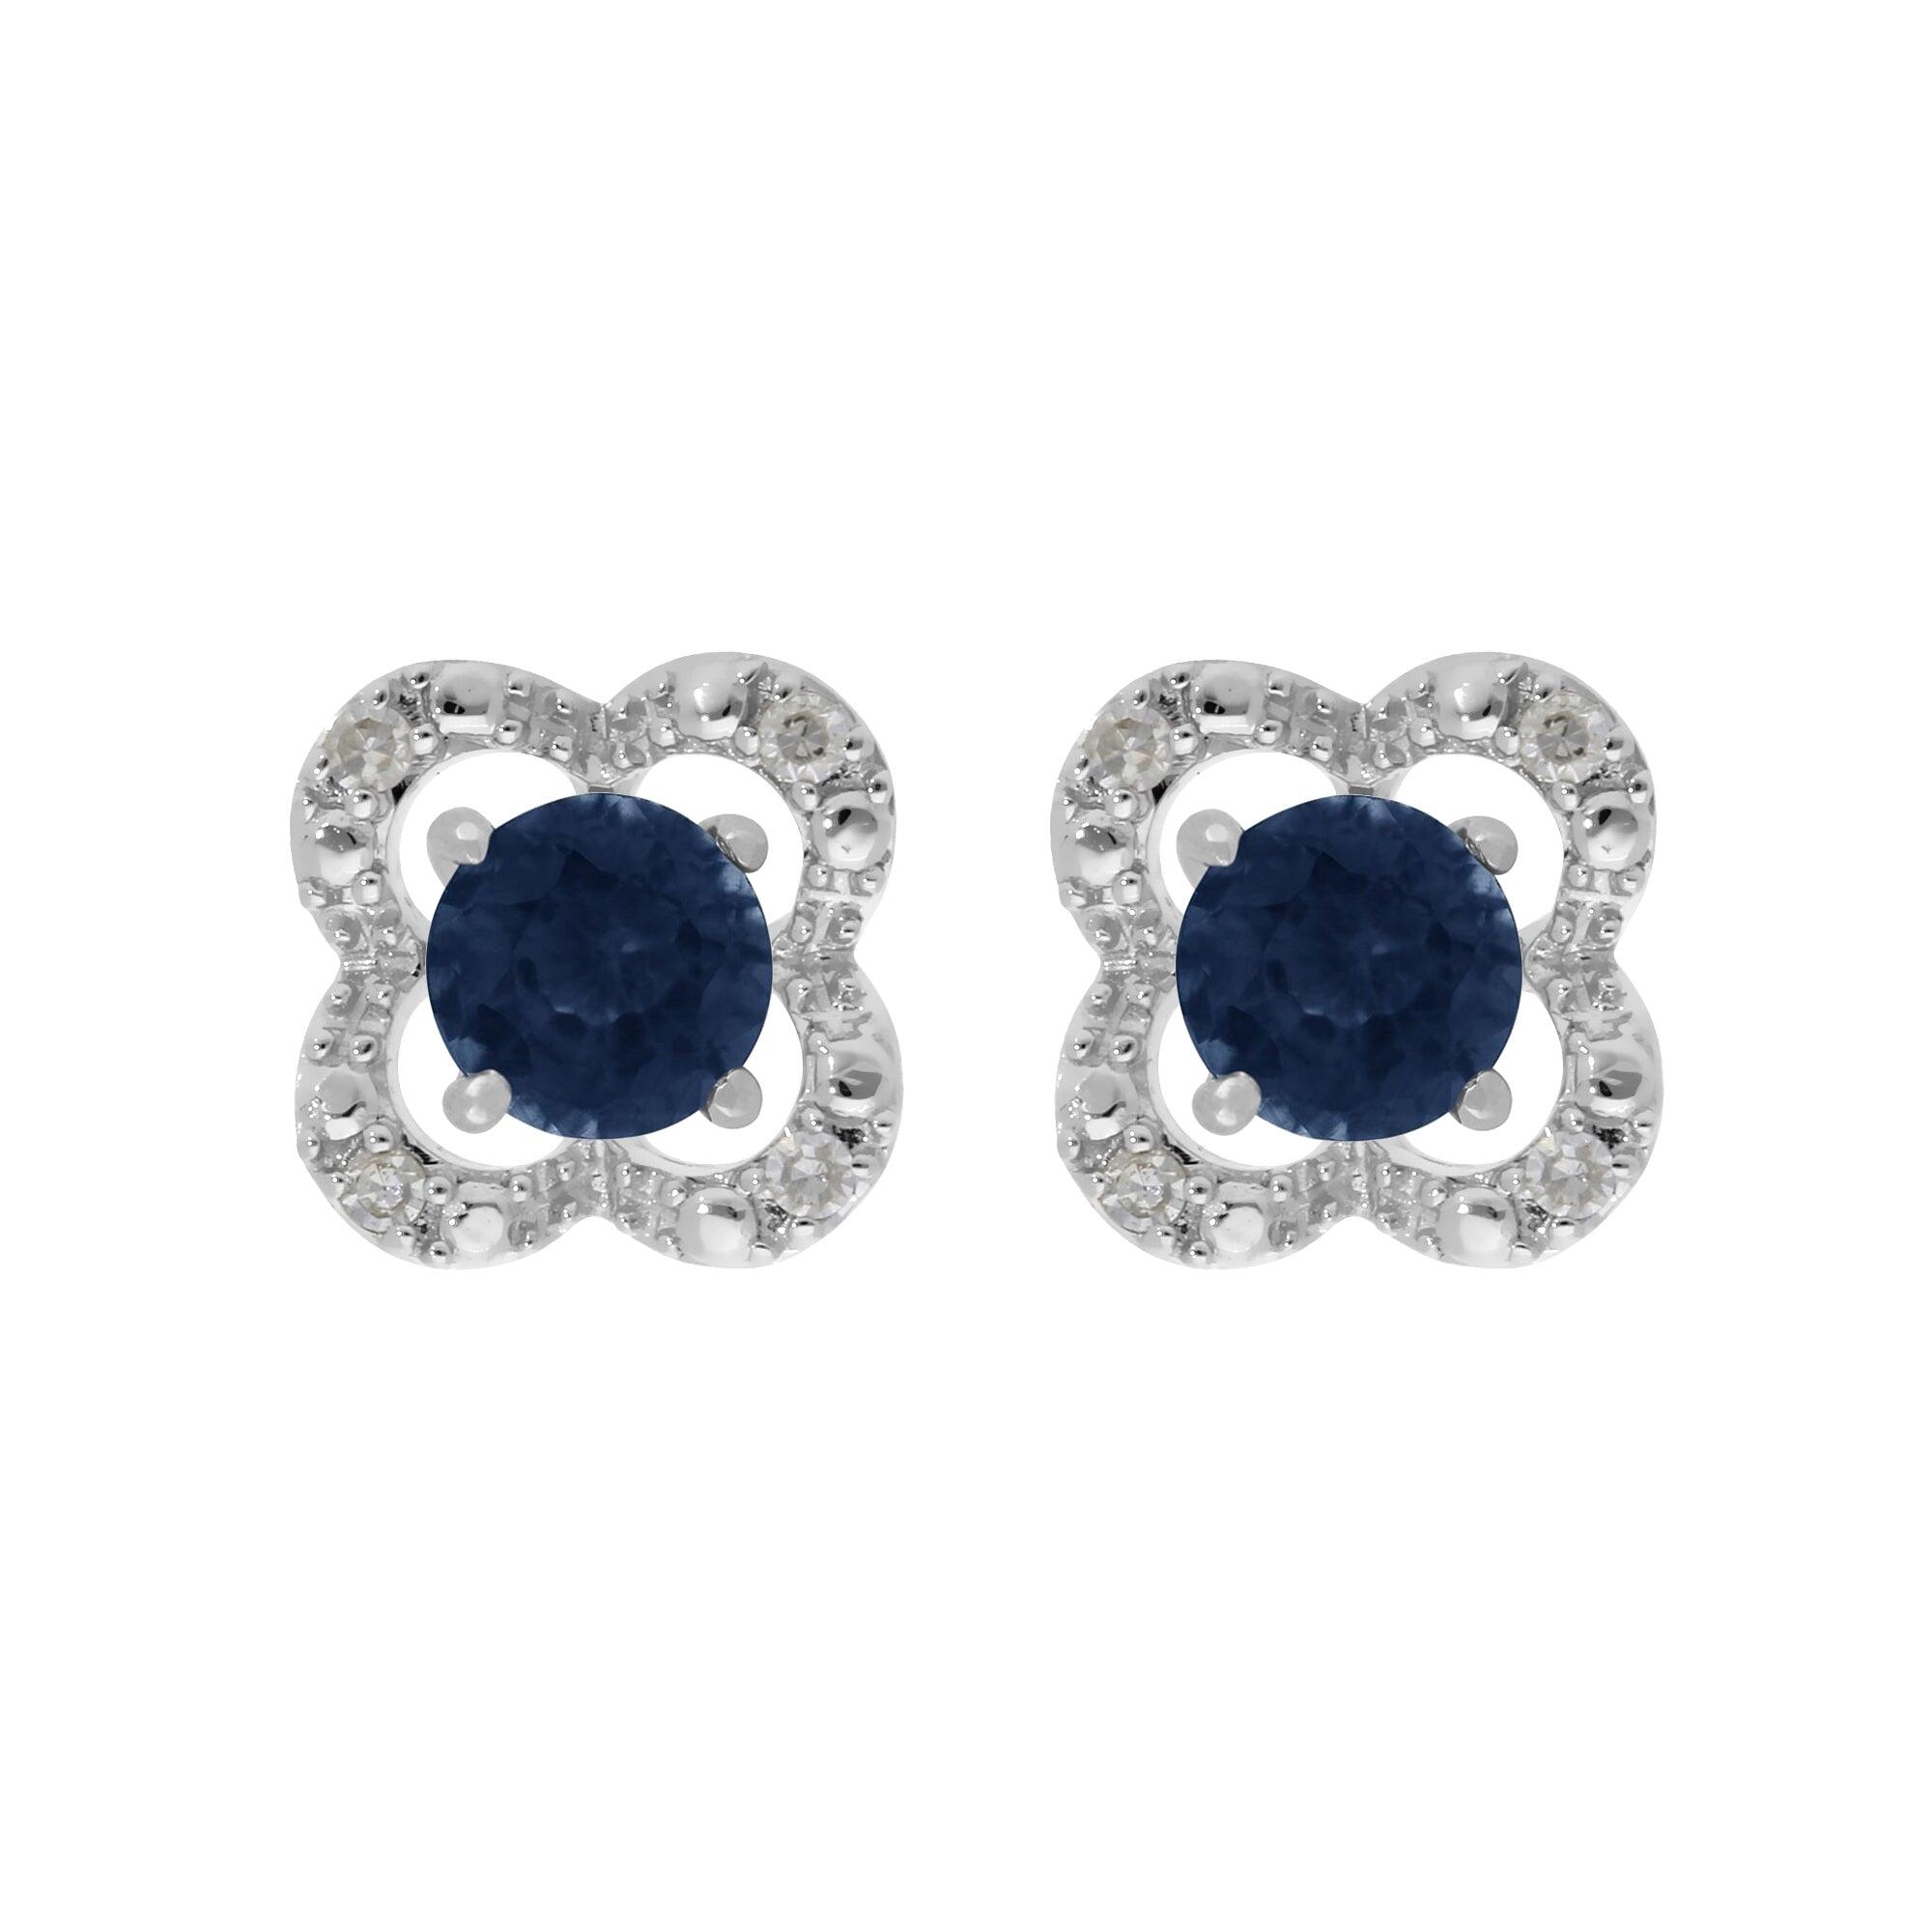 Classic Round Blue Sapphire Studs with Detachable Diamond Flower Ear Jacket in 9ct White Gold